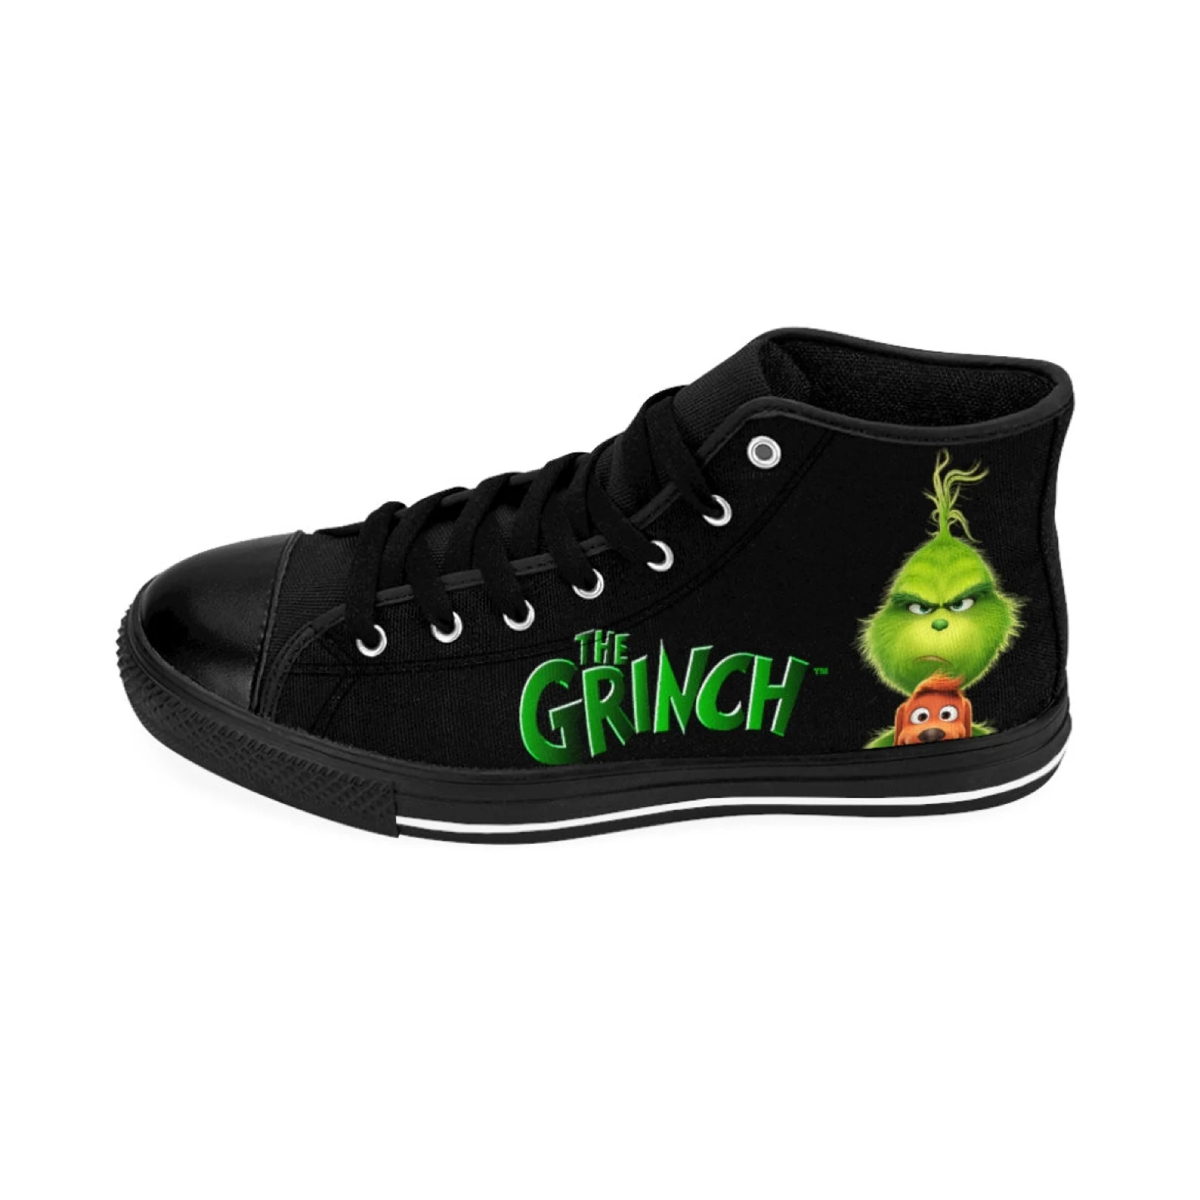 Grinch Shoes High-Top Sneakers V16 On Sale - EvaPurses